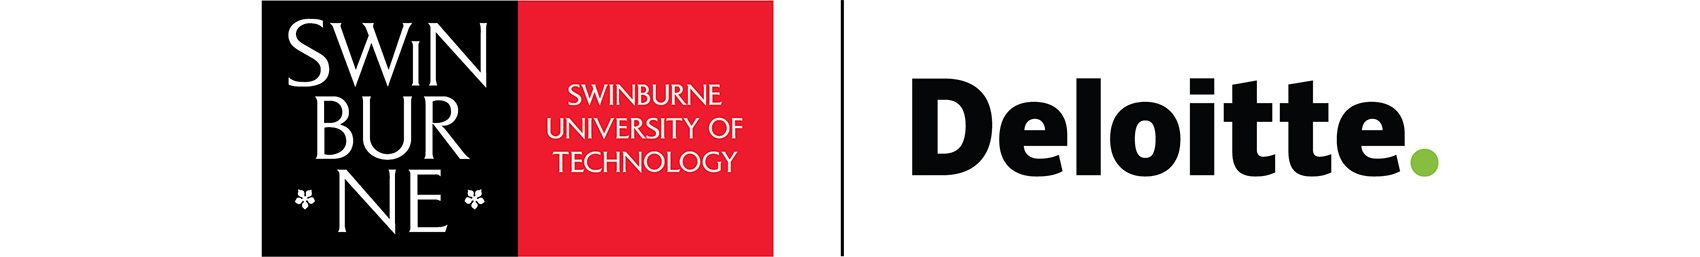 The Swinburne University of Technology logo is to the left and the text 'Deloitte' to the far right